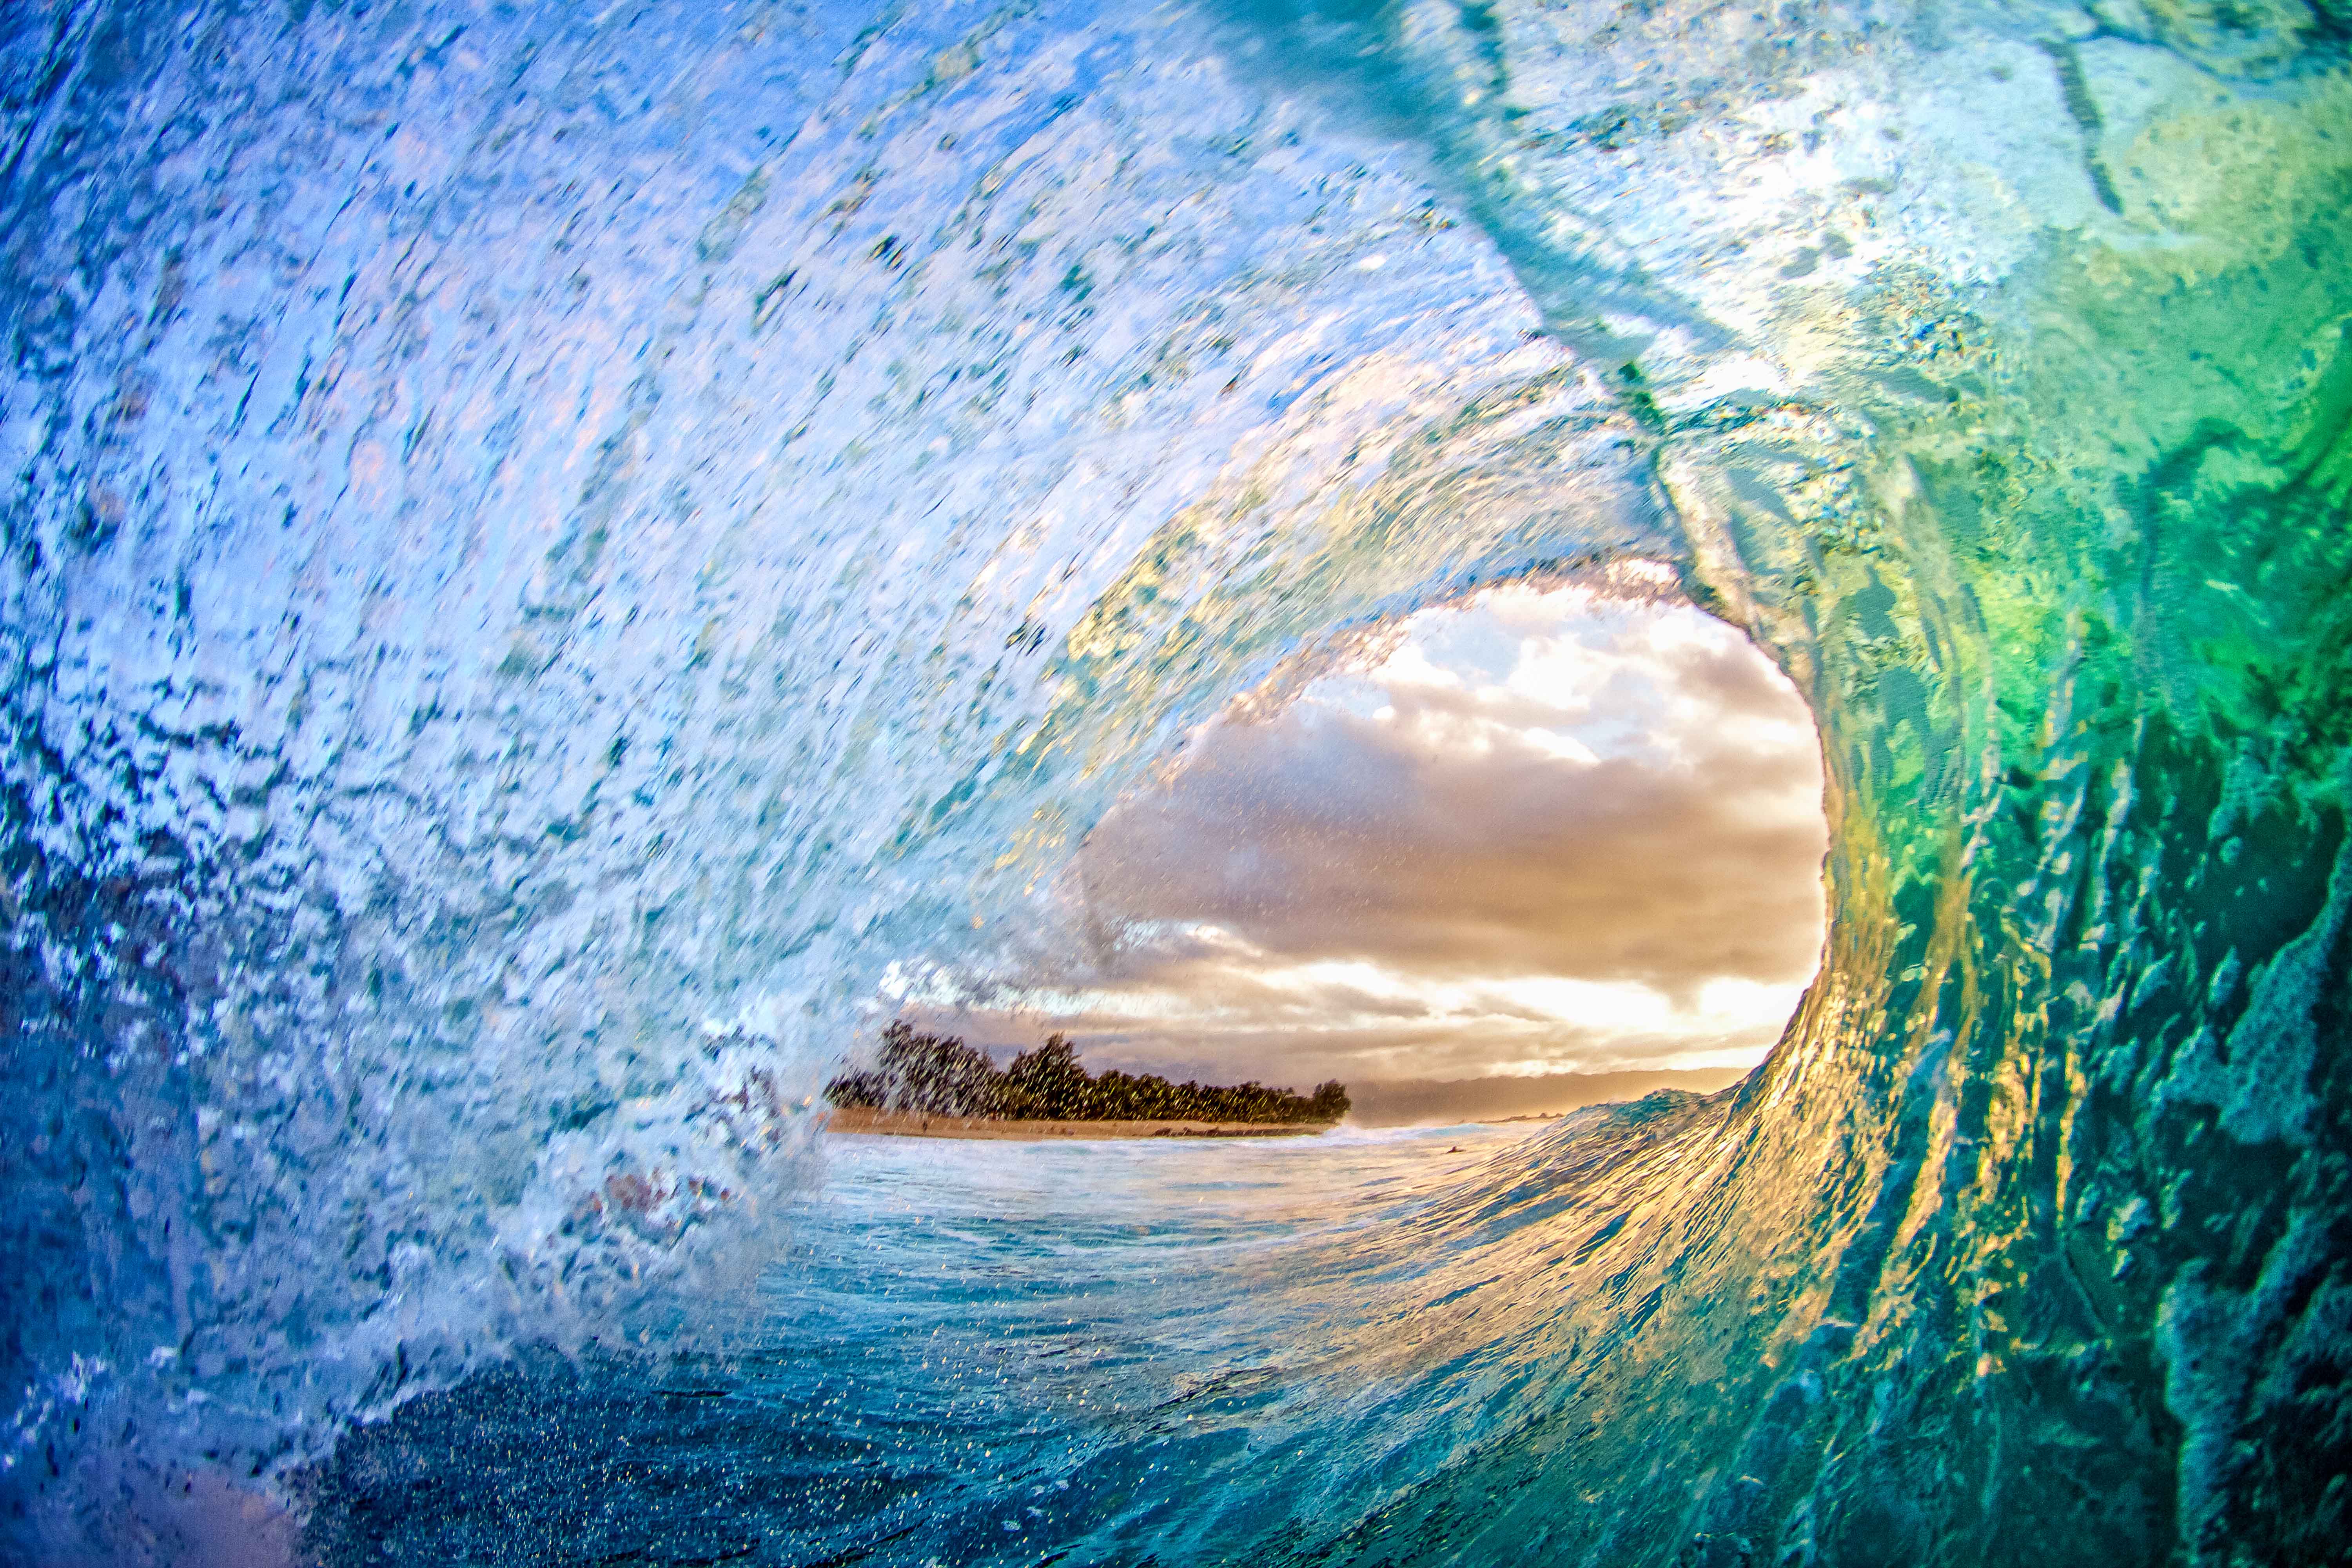 Some Of The Most Awesome Ocean Photography You'll Ever See